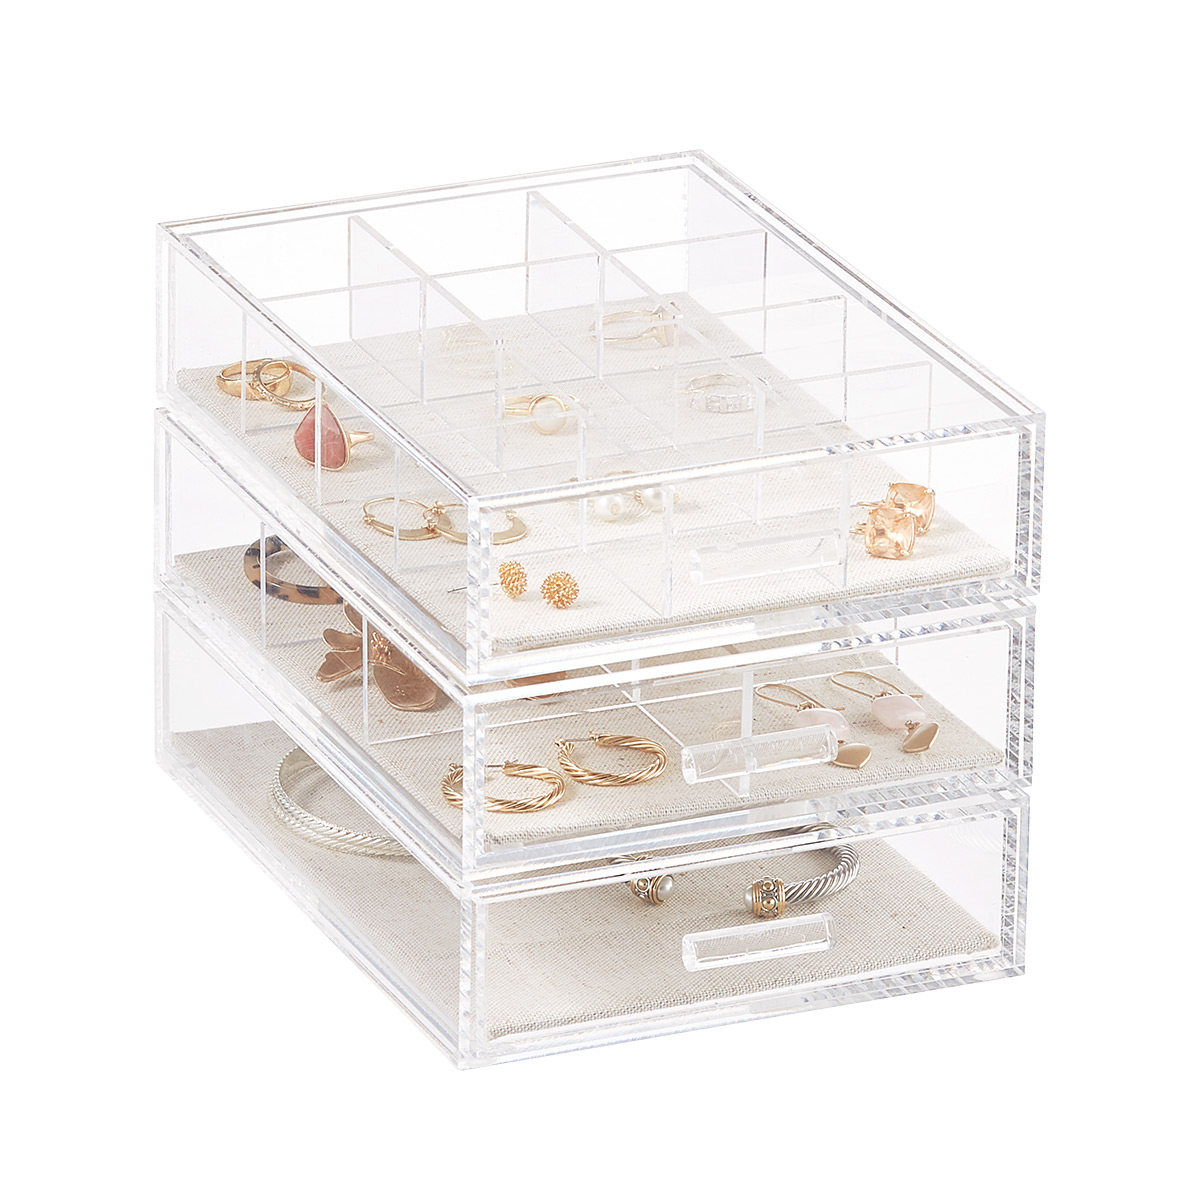 https://www.containerstore.com/catalogimages/392862/10081575g-narrow-acrylic-jewelry-dra.jpg